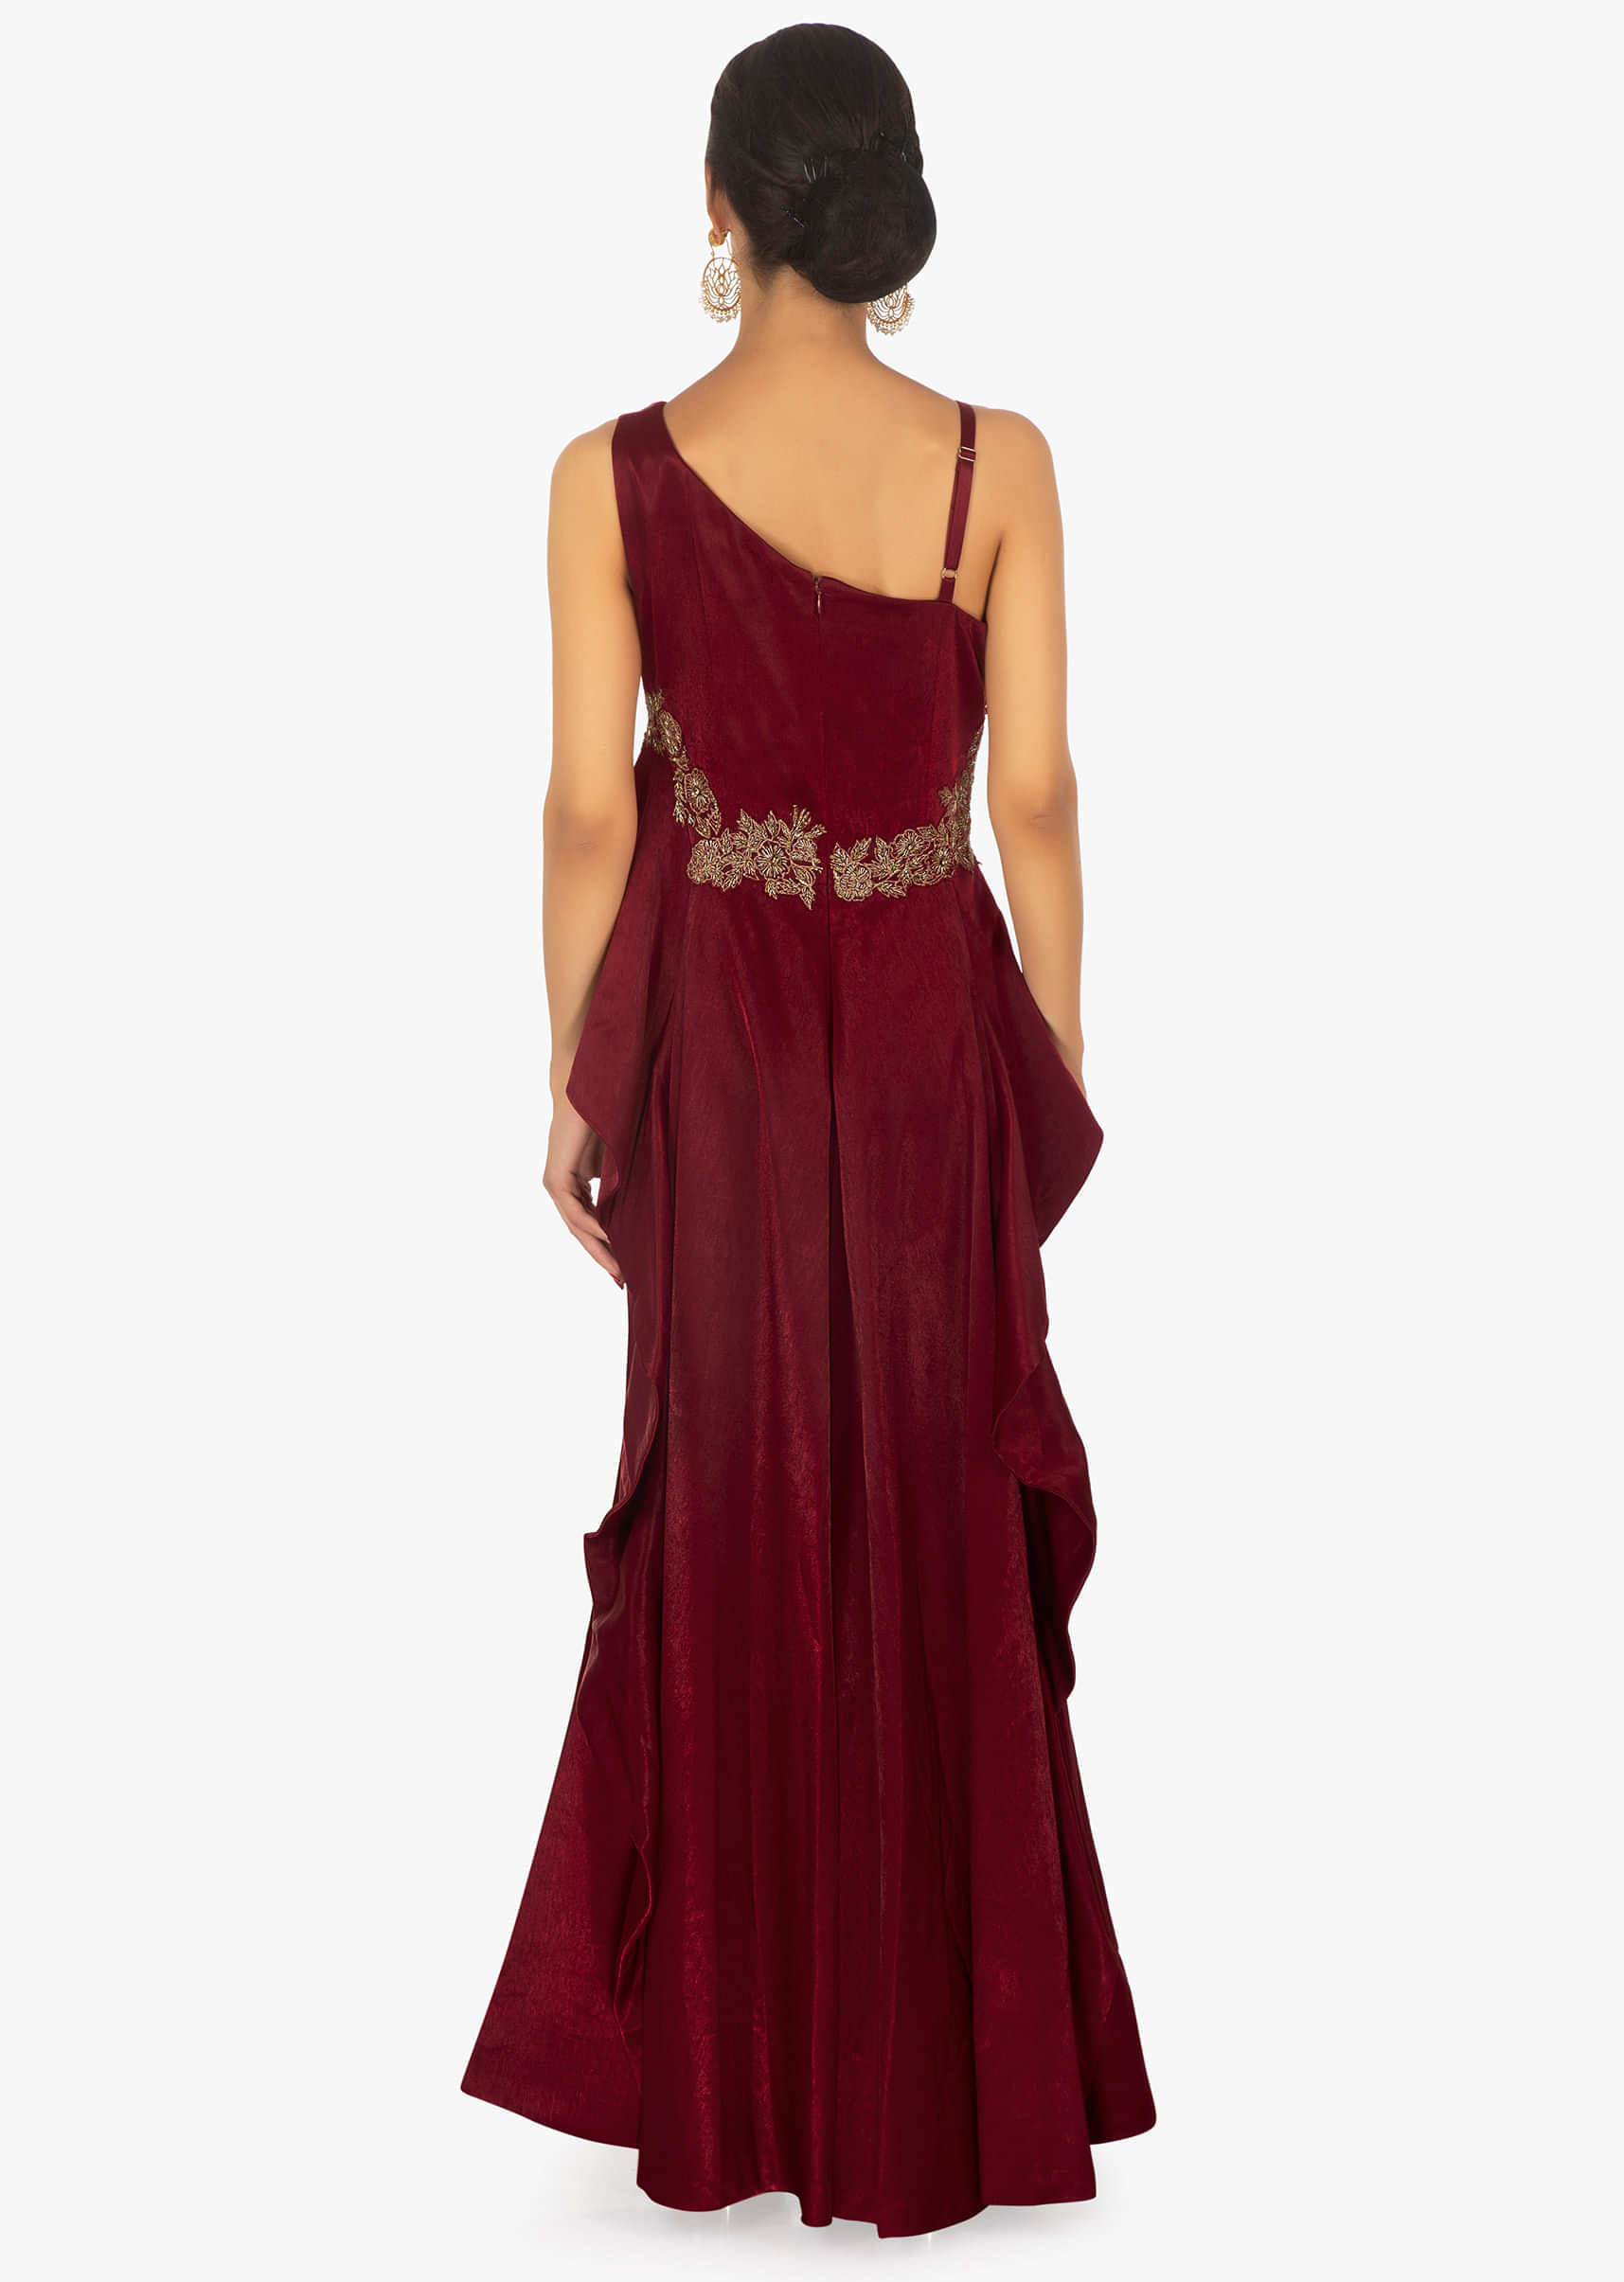 Maroon  one side strap gown in peplum style embellished in bird and floral motif